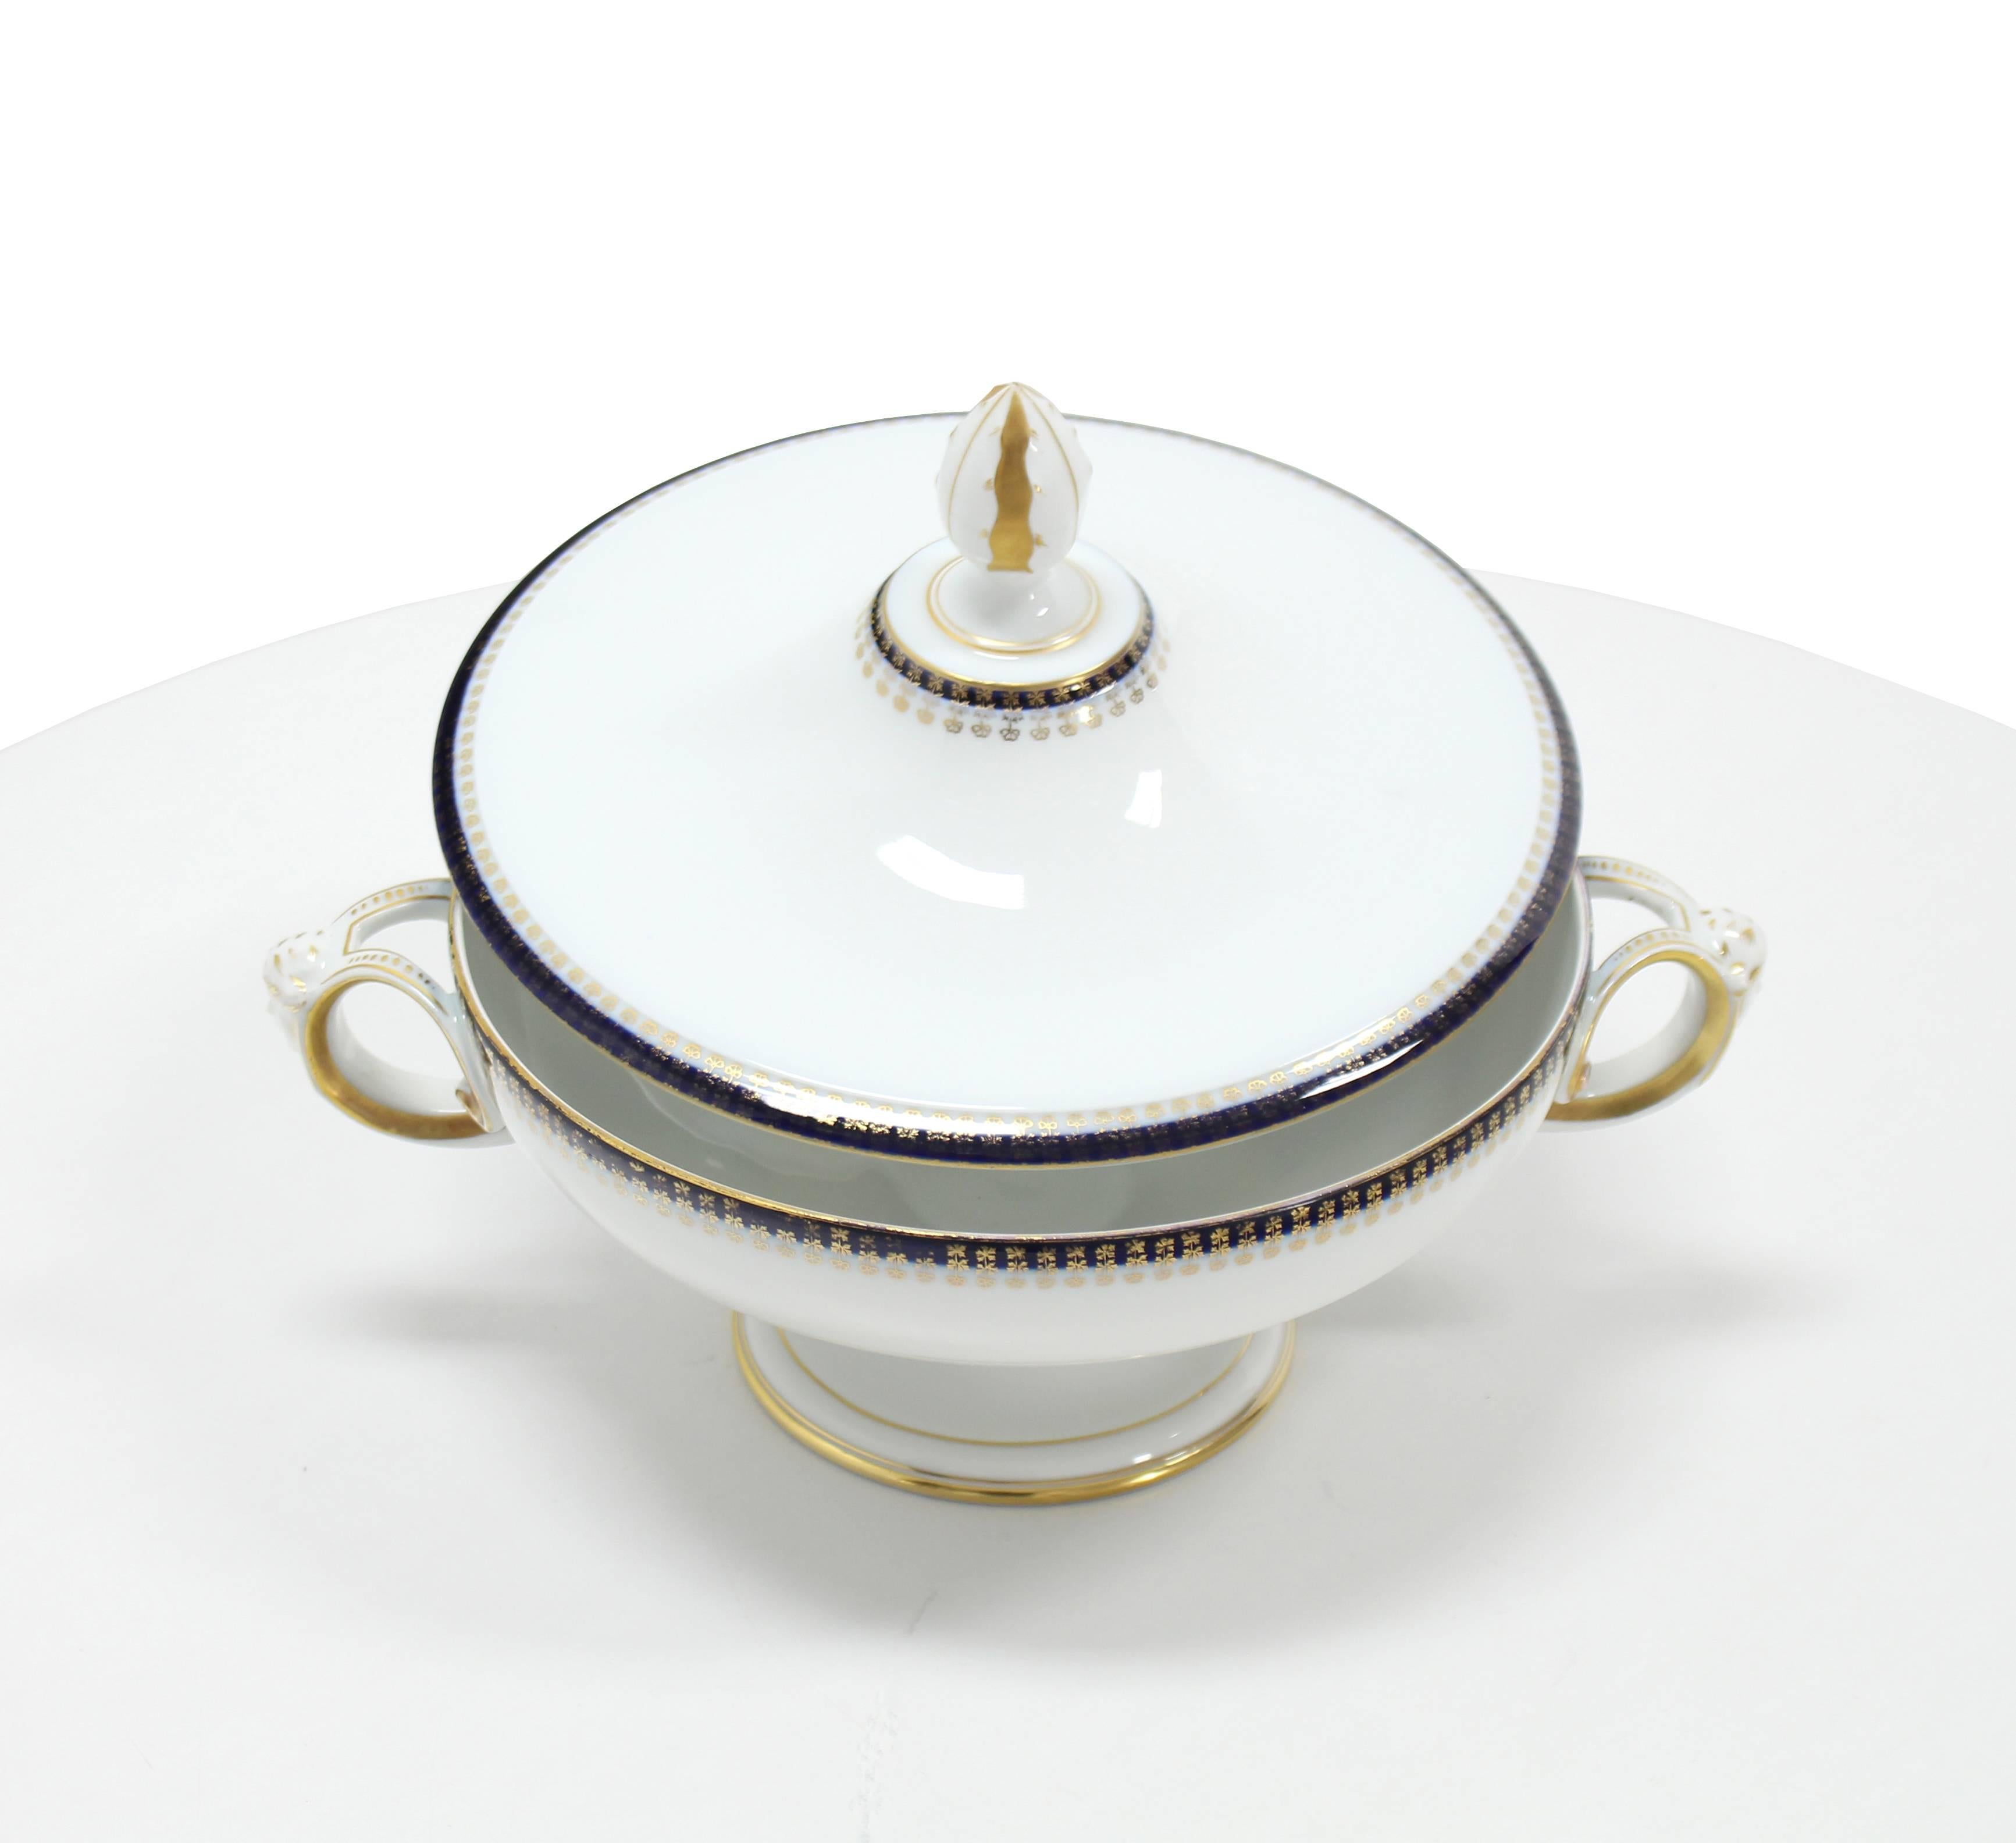 Rosenthal Porcelain Tureen Serving Dish Cobalt and Gold In Excellent Condition For Sale In Rockaway, NJ